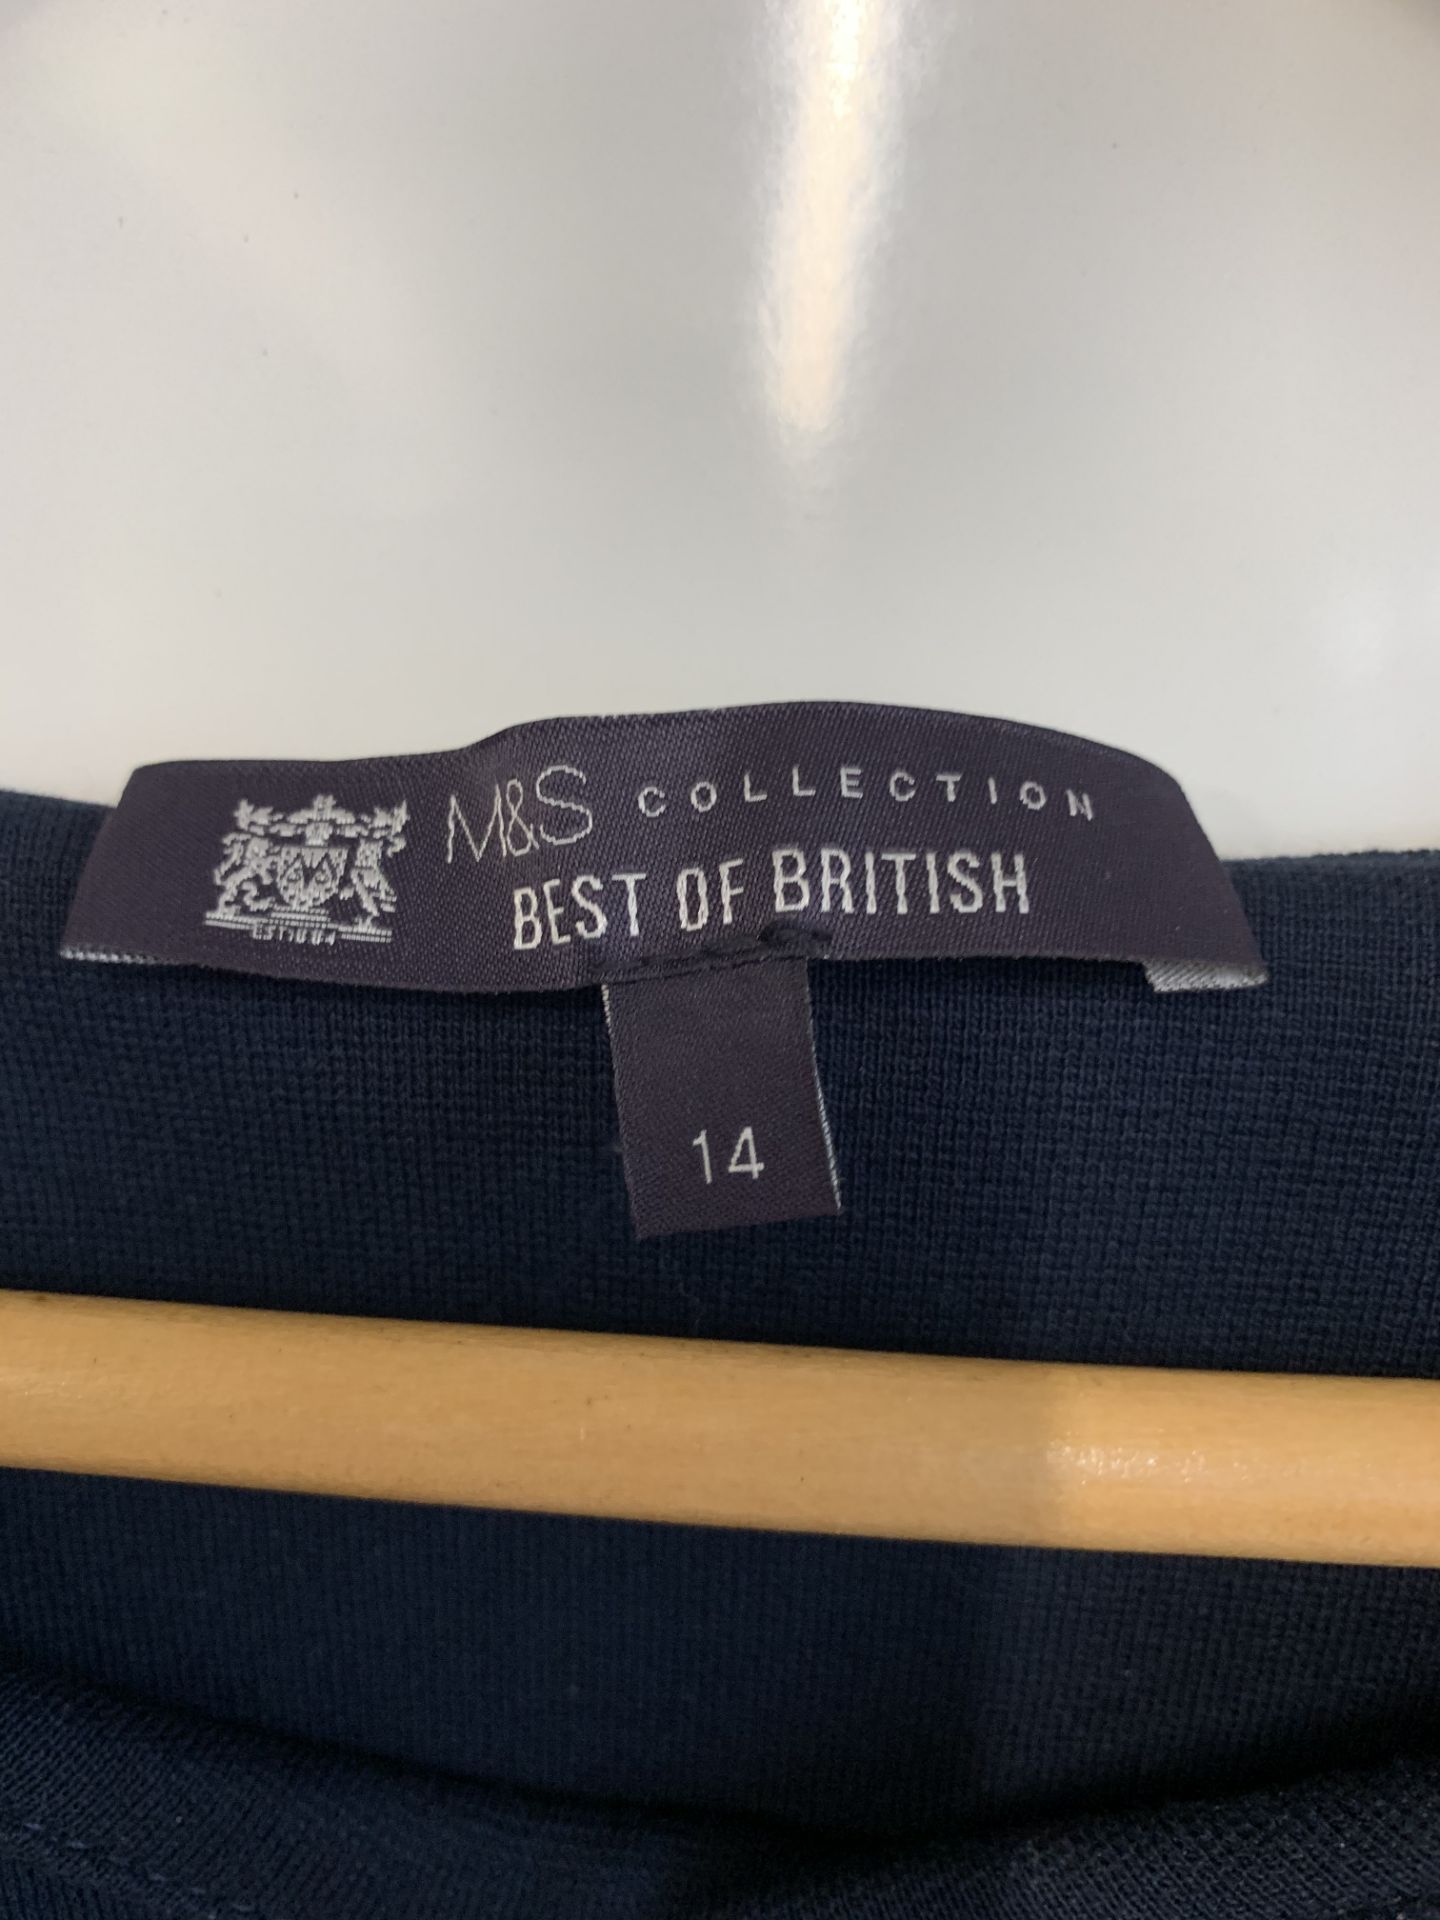 M&S collection Best of British Pinstripe Shift Dress - Image 2 of 2